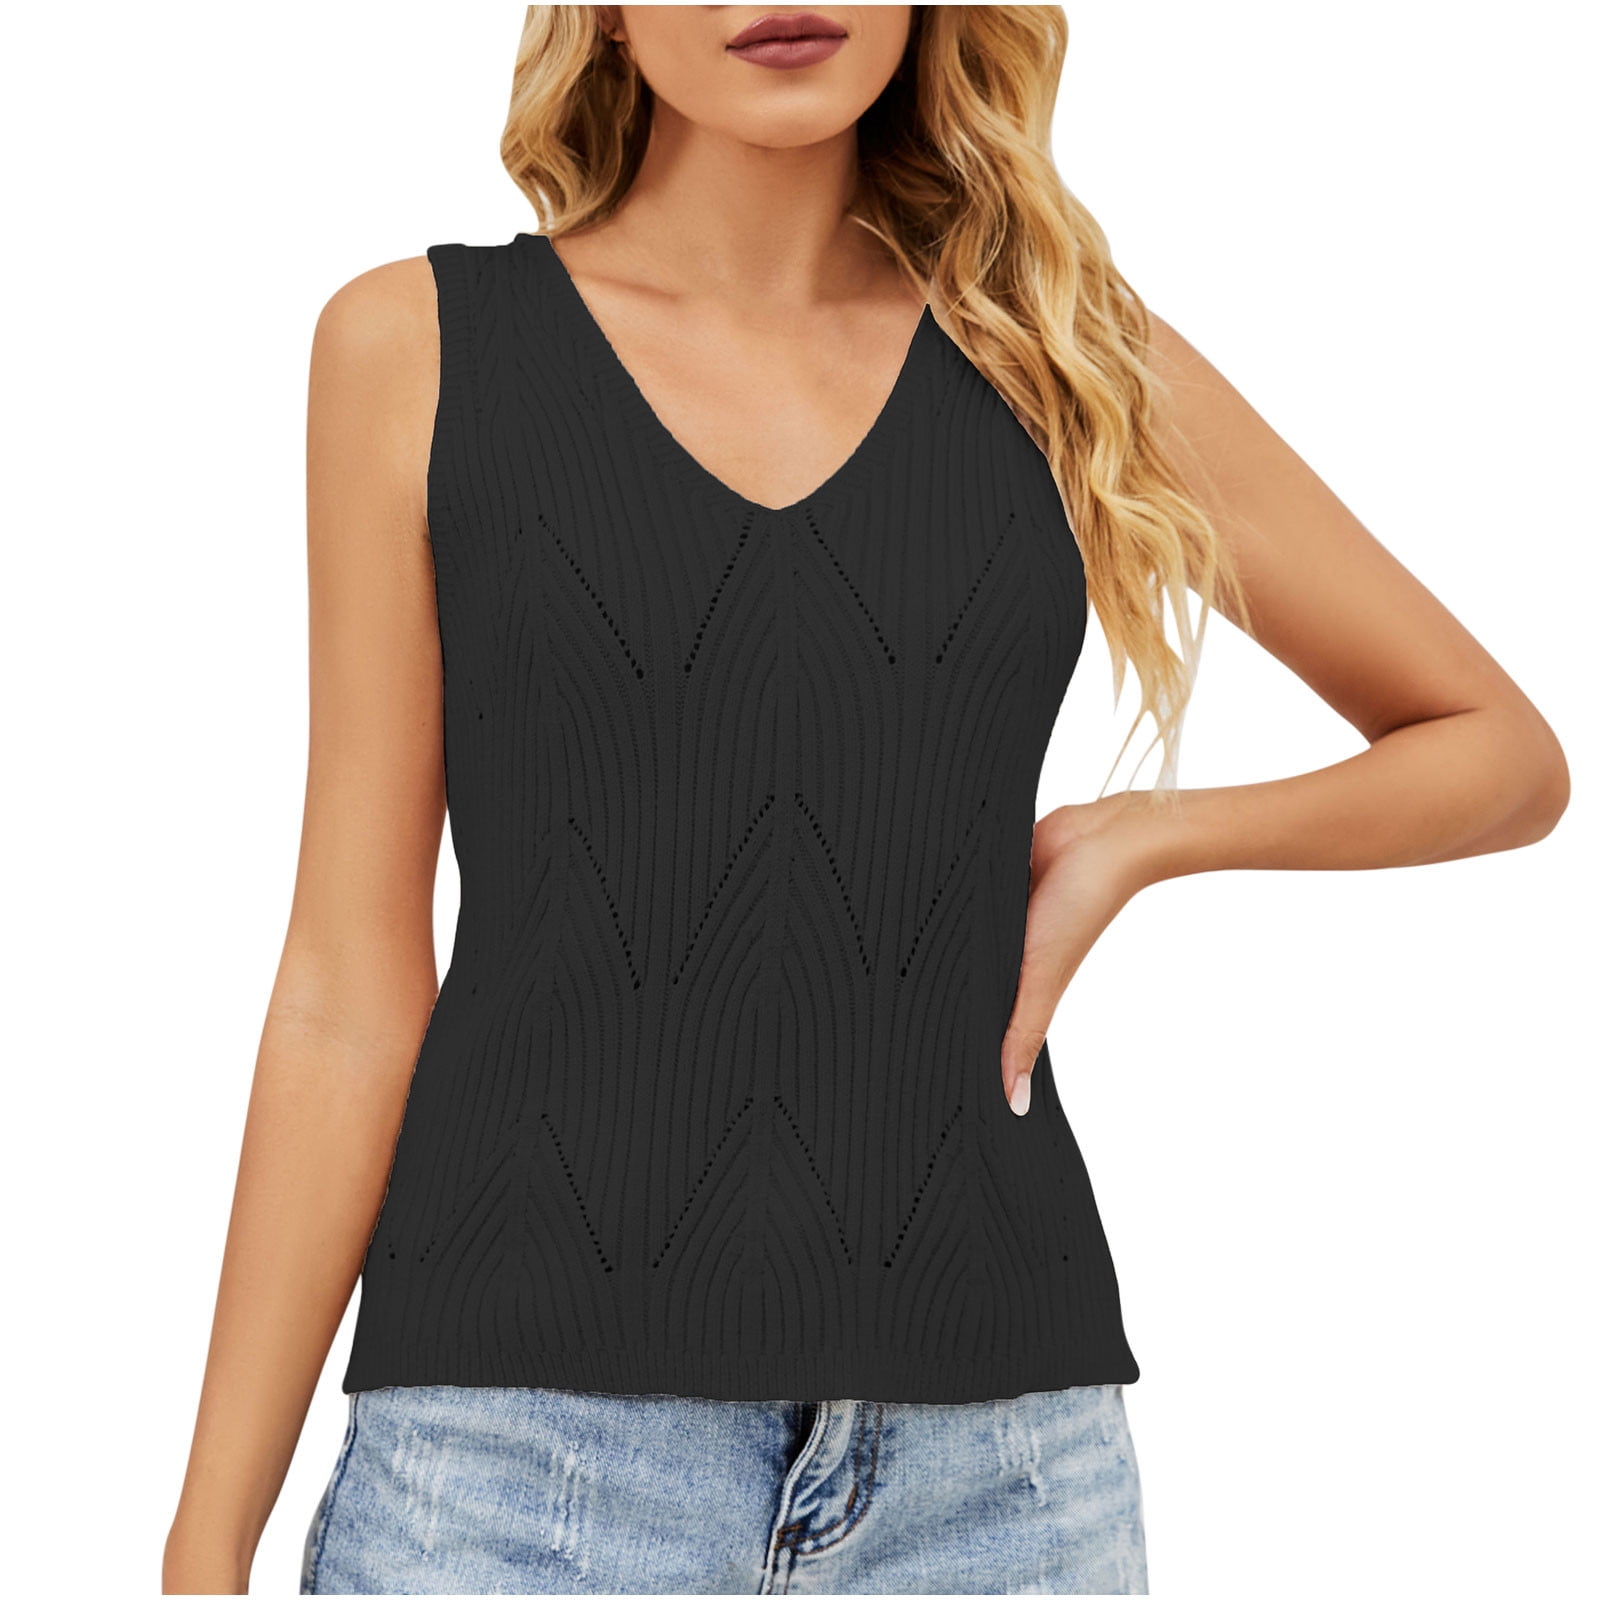 RQYYD Discount Women's Sexy Crochet Knit V Neck Tank Tops Sleeveless Hollow  Out Casual Loose Fit Cami Sweater Vest(Black,XL) 